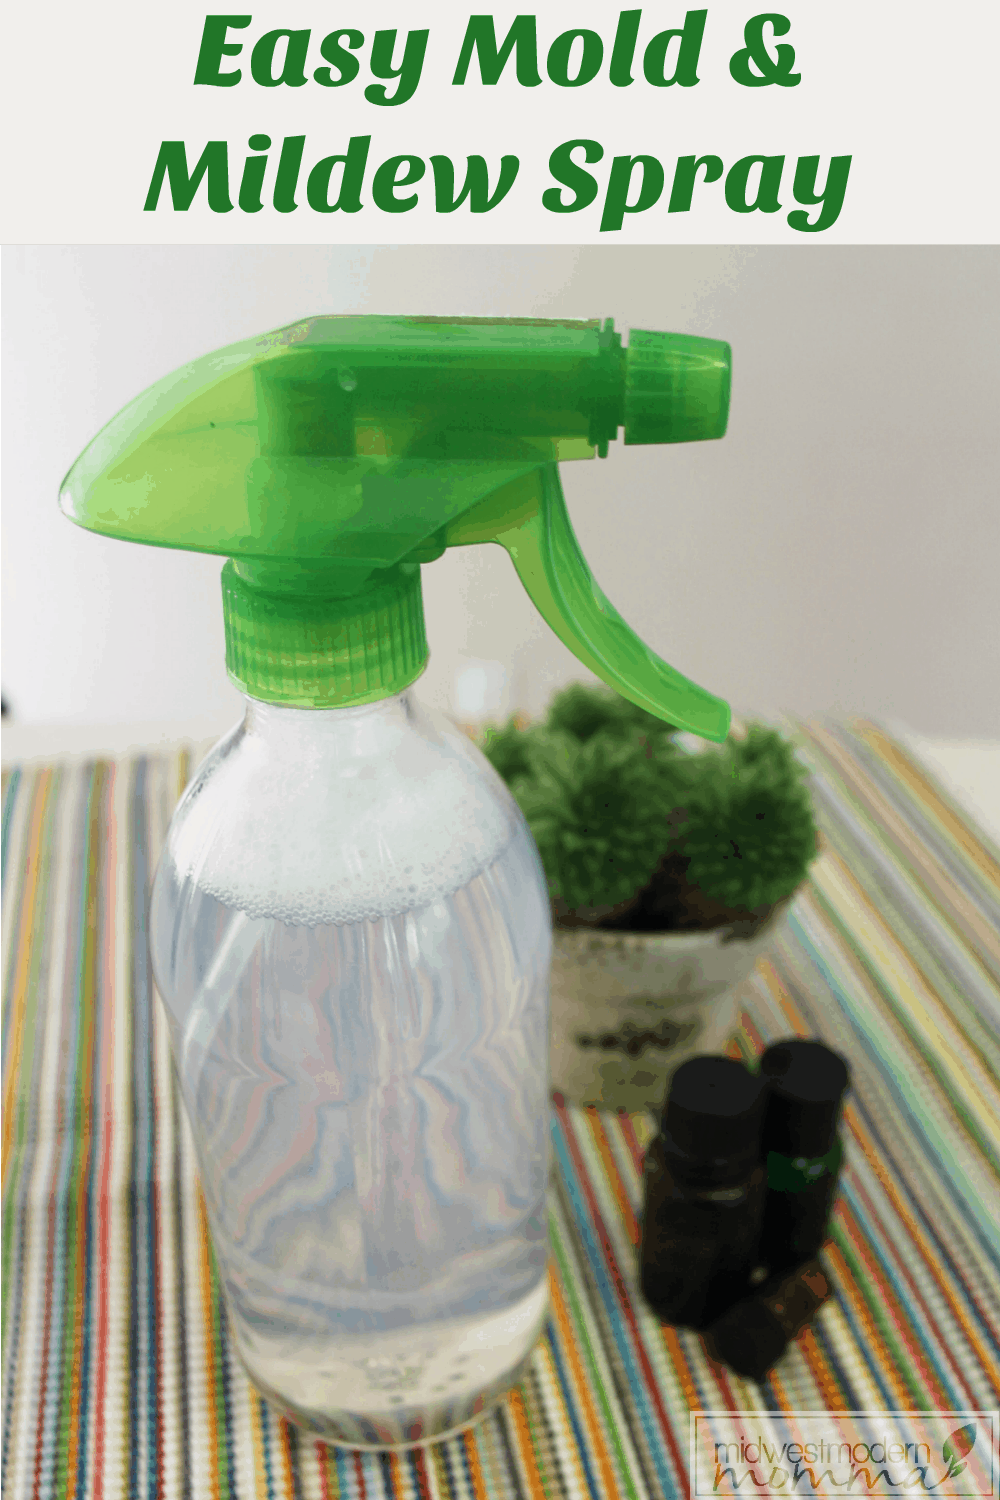 Homemade Mildew Removal Spray {Mold too!}